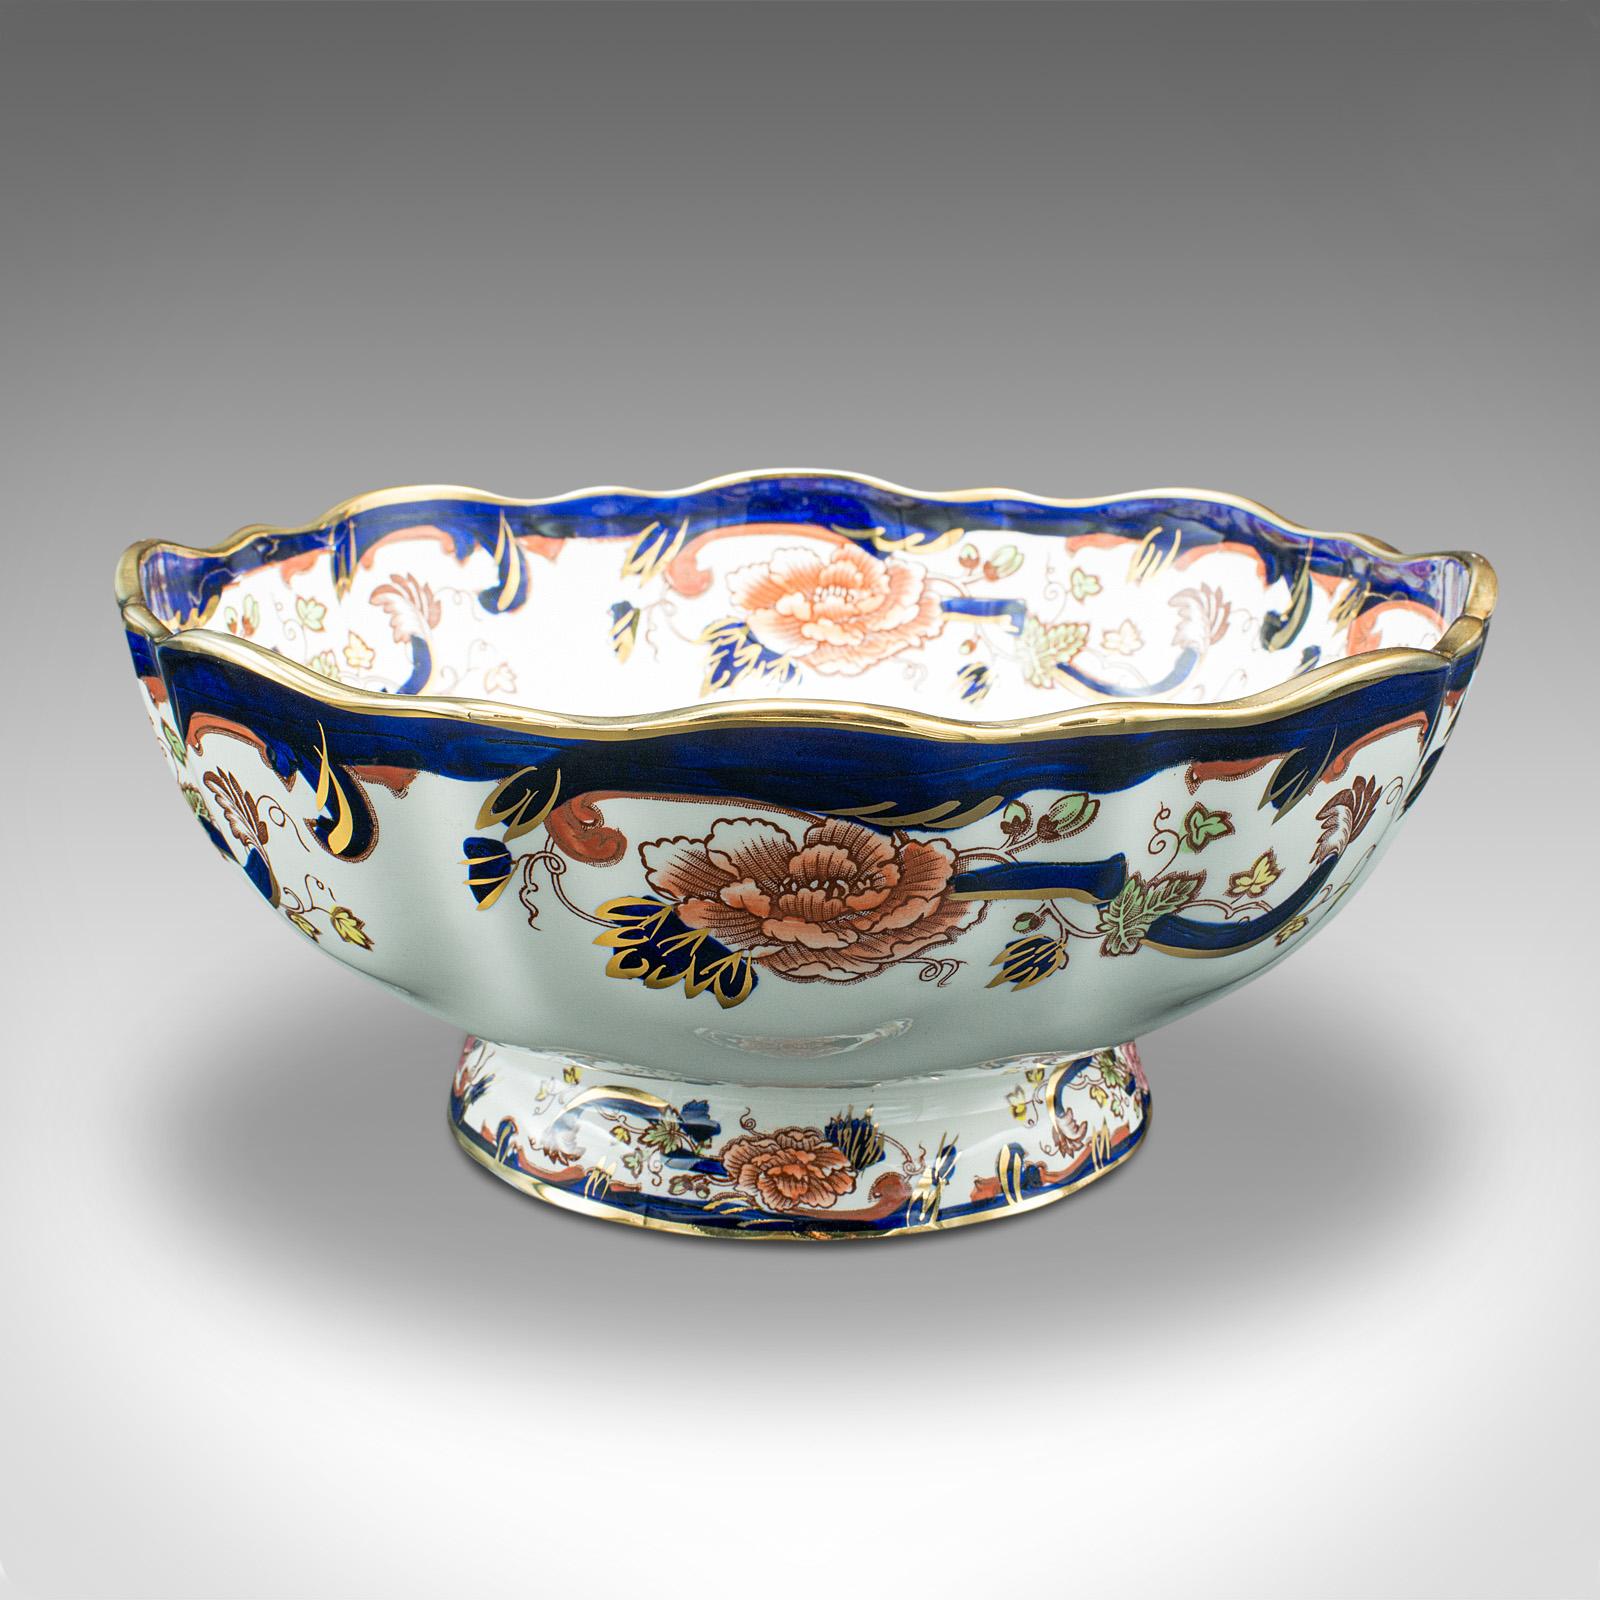 This is a vintage serving bowl. An English, ceramic decorative fruit dish, dating to the late 20th century, circa 1970.

Pleasingly eye-catching bowl, ideal for serving or presenting fruit on the table
Displays a desirable aged patina and in good